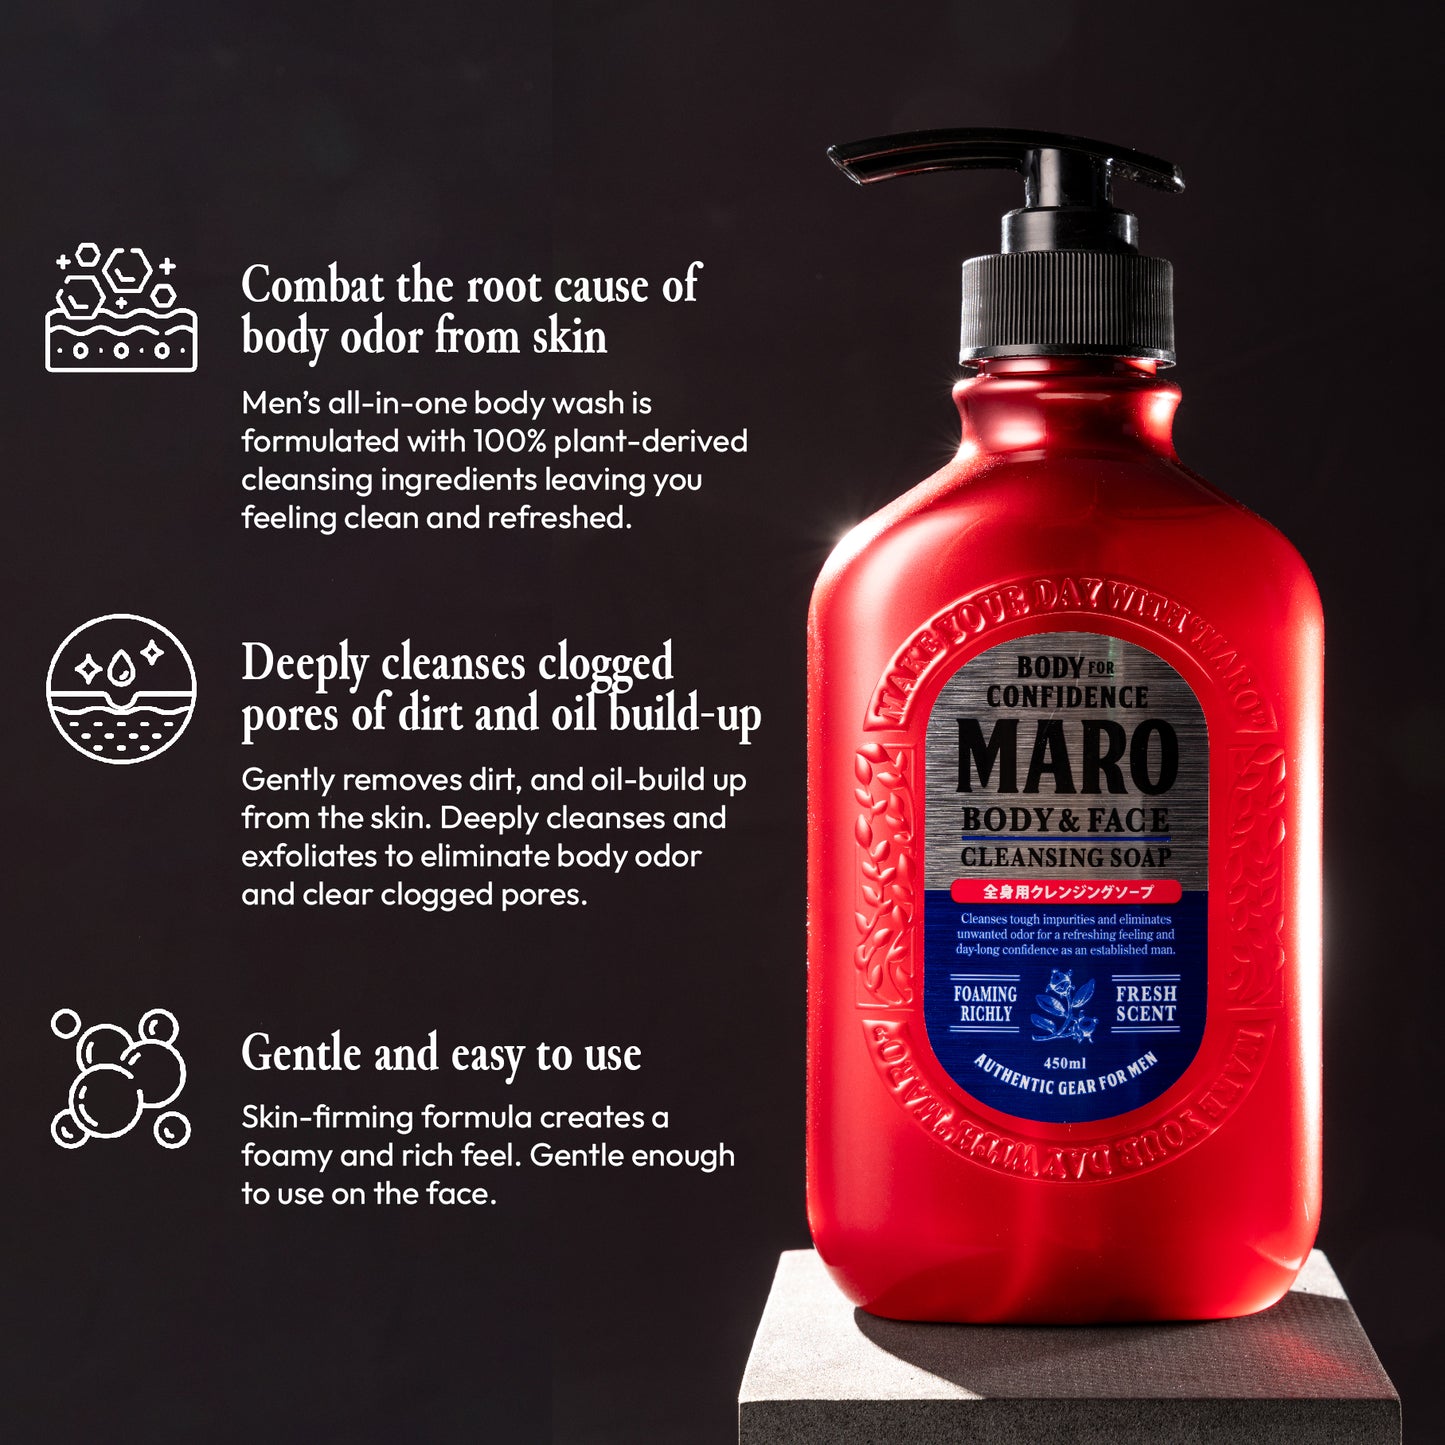 MARO Body and Face Cleansing Soap